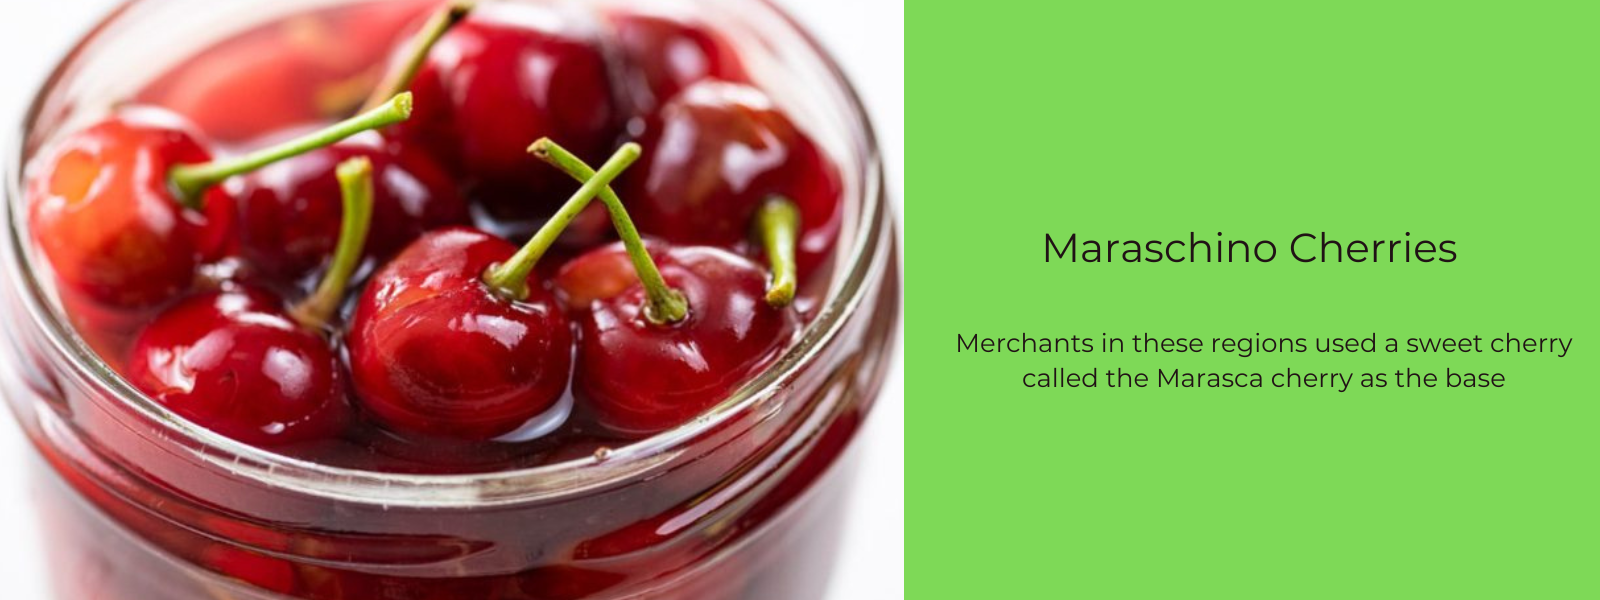 Maraschino Cherries – Health Benefits, Uses and Important Facts